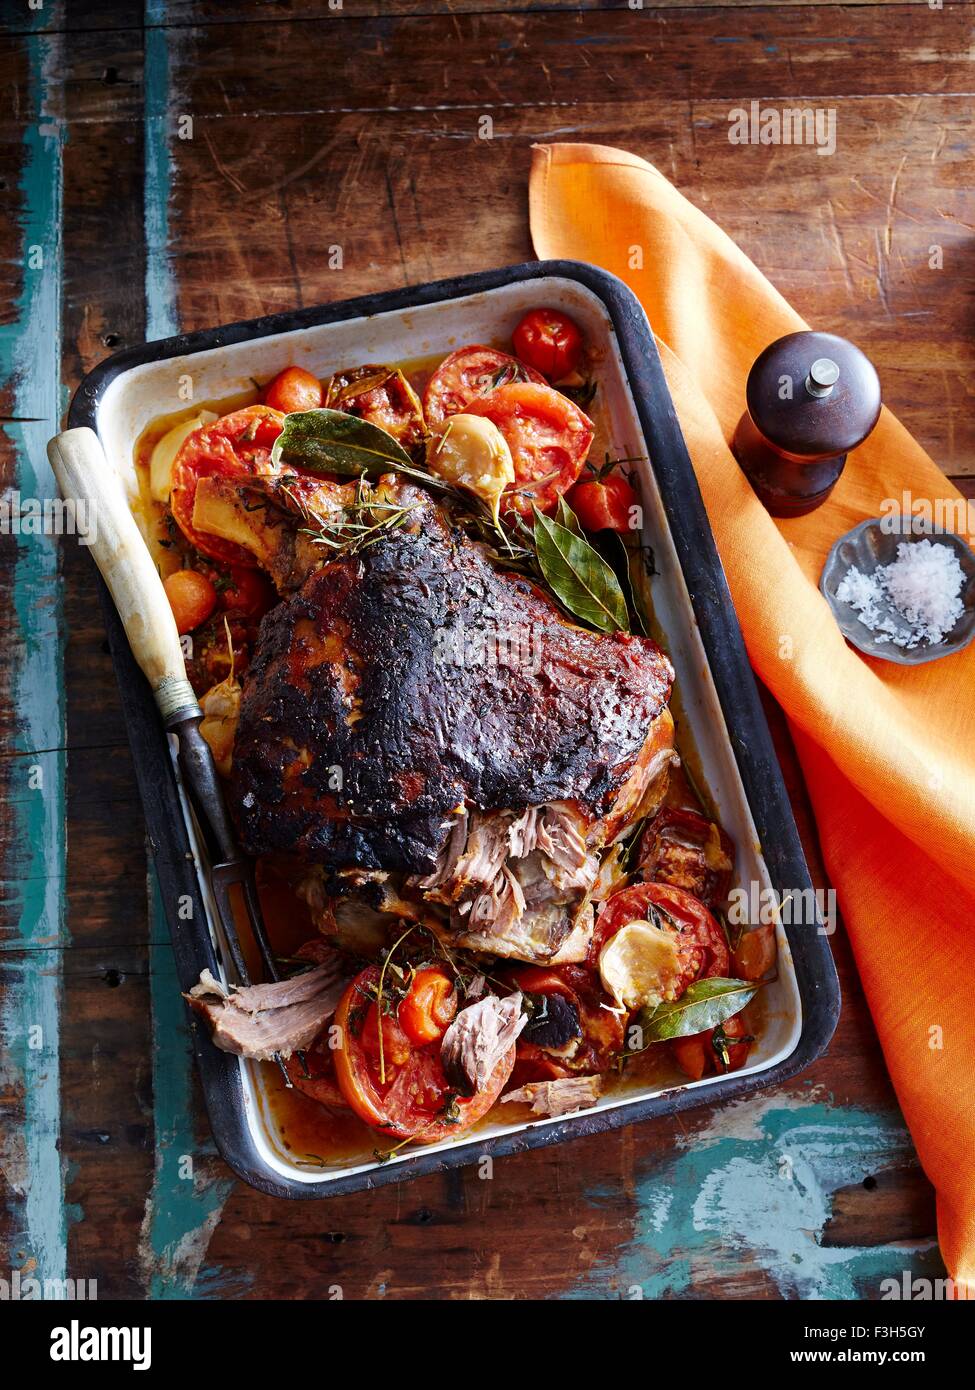 Slow roasted lamb with tomato and garlic crust Stock Photo